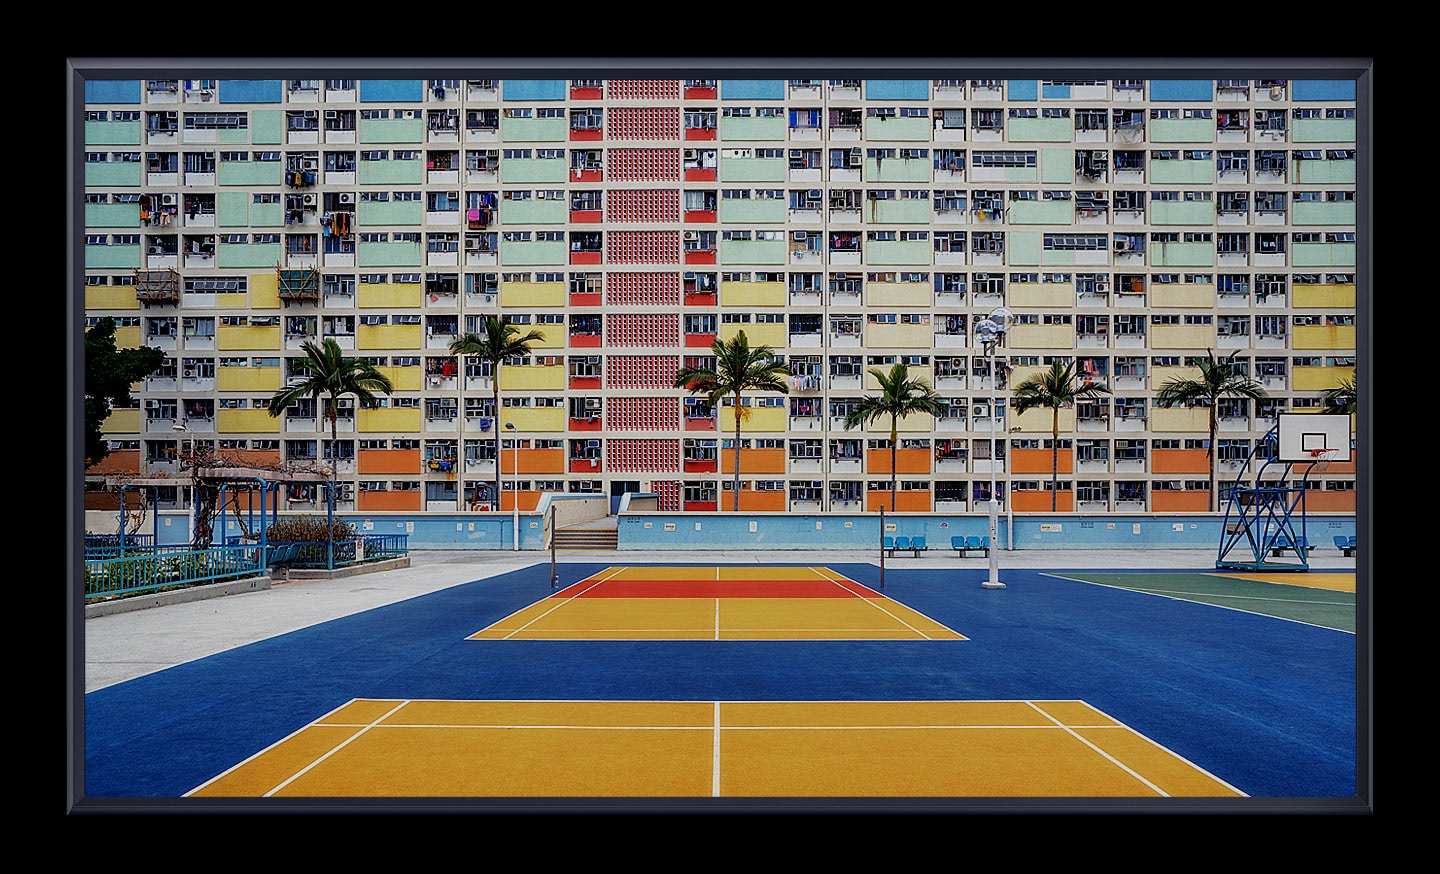 The Sero TV 2022 is displaying a very colorful and clear tennis court with some trees and an apartment in the background. The display is in horizontal mode.